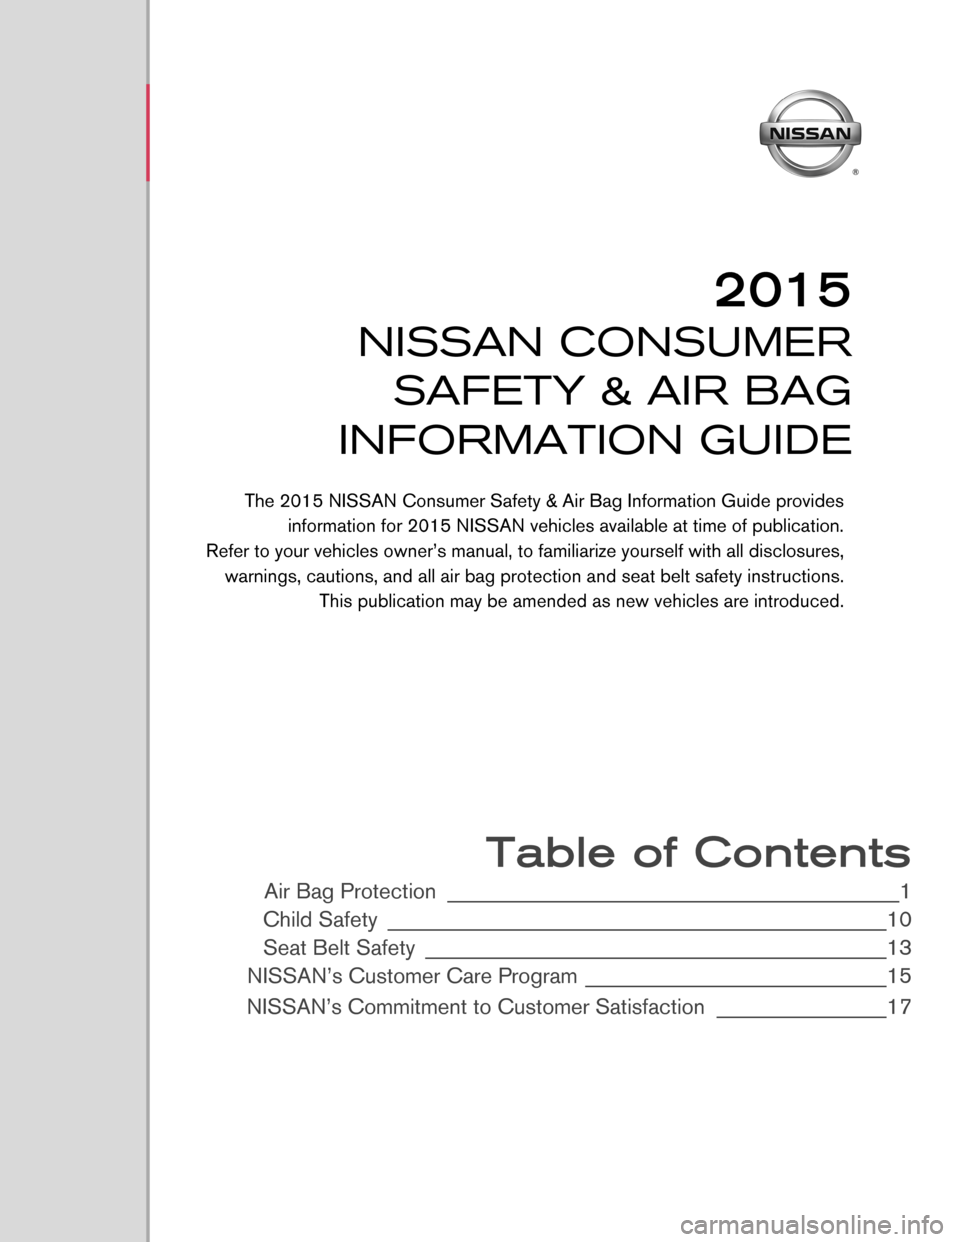 NISSAN SENTRA 2015 B17 / 7.G Consumer Safety Air Bag Information Guide  
 
 
 
 
 
 
 
 
 
 
 
 
 
 
 
 
 
 
 
 
 
 
 Table of Contents 
Air Bag Protection __________________\d__________________\d____________1 
Child \fafety _________________________\d__________________\